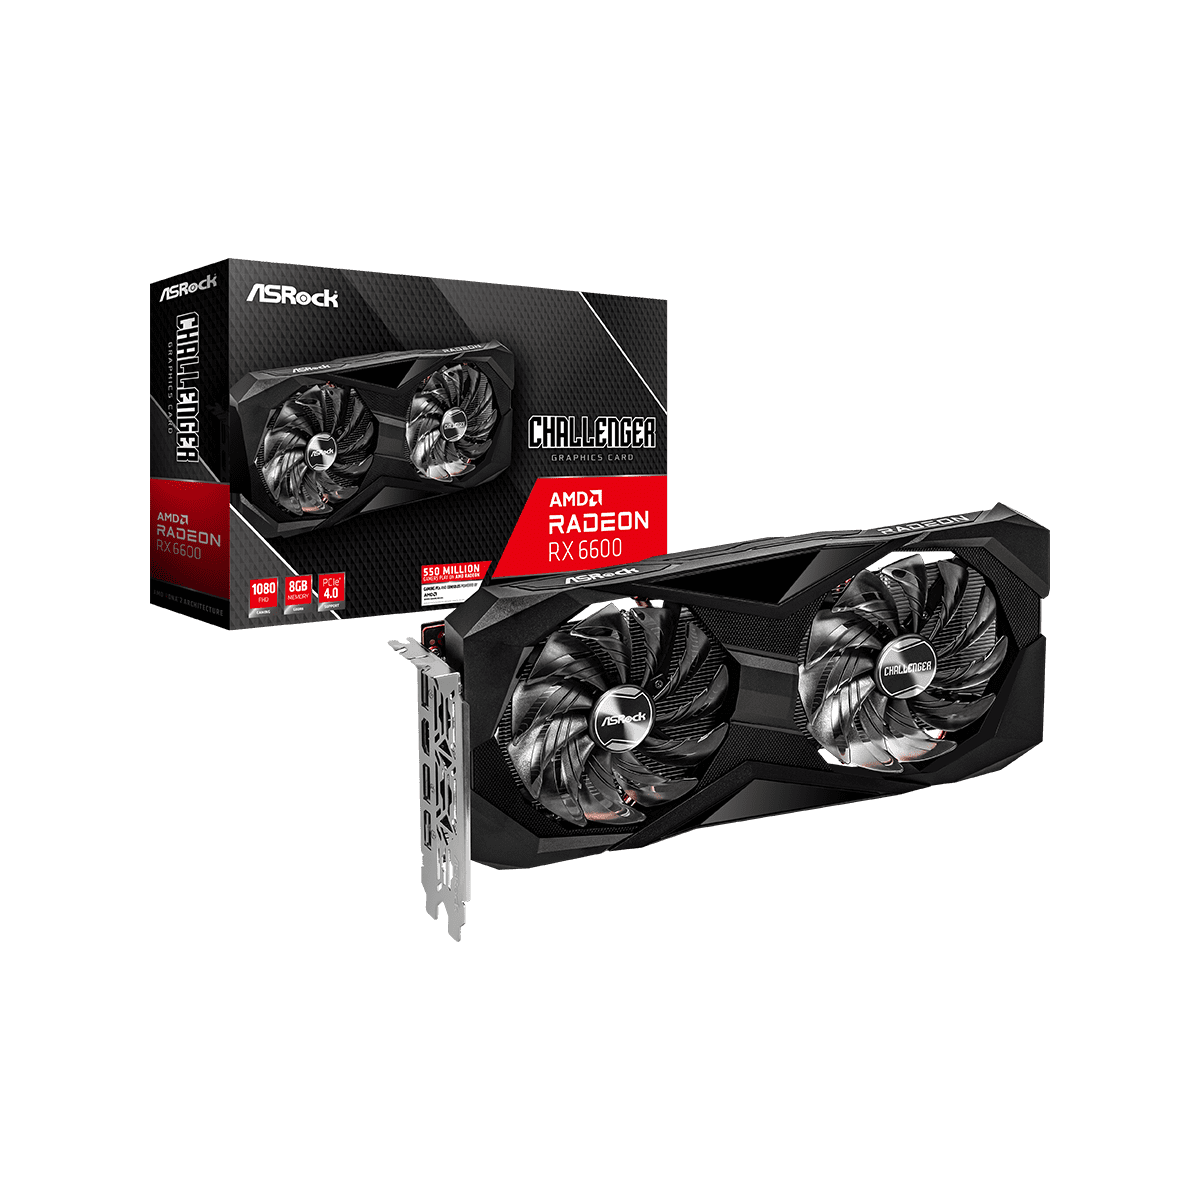 RX6600 CLD 8G | ASRock(アスロック) Radeon RX 6600 搭載 